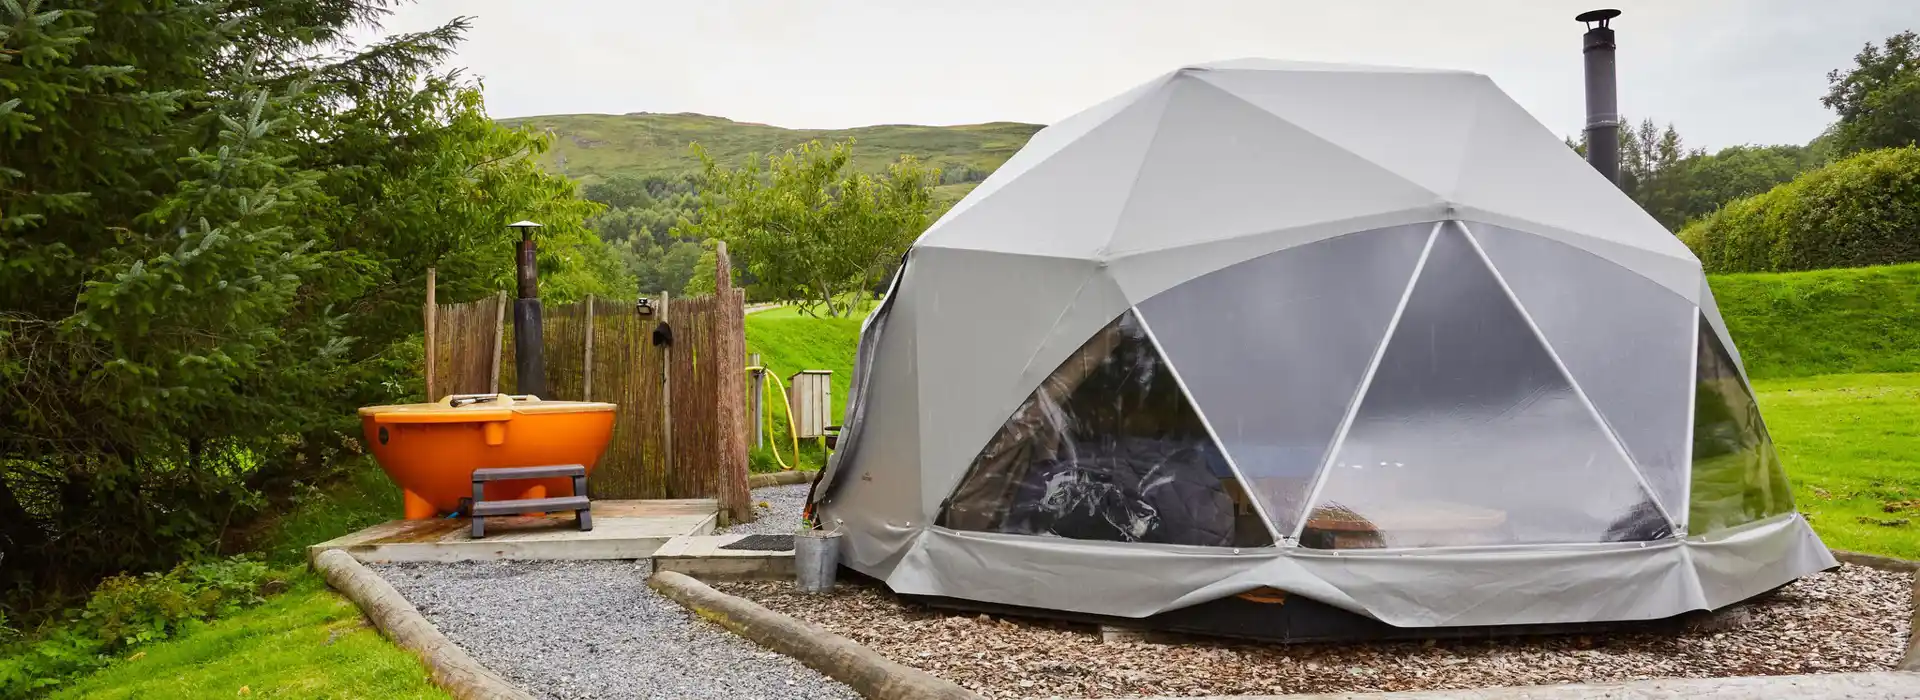 Glamping domes with hot tubs